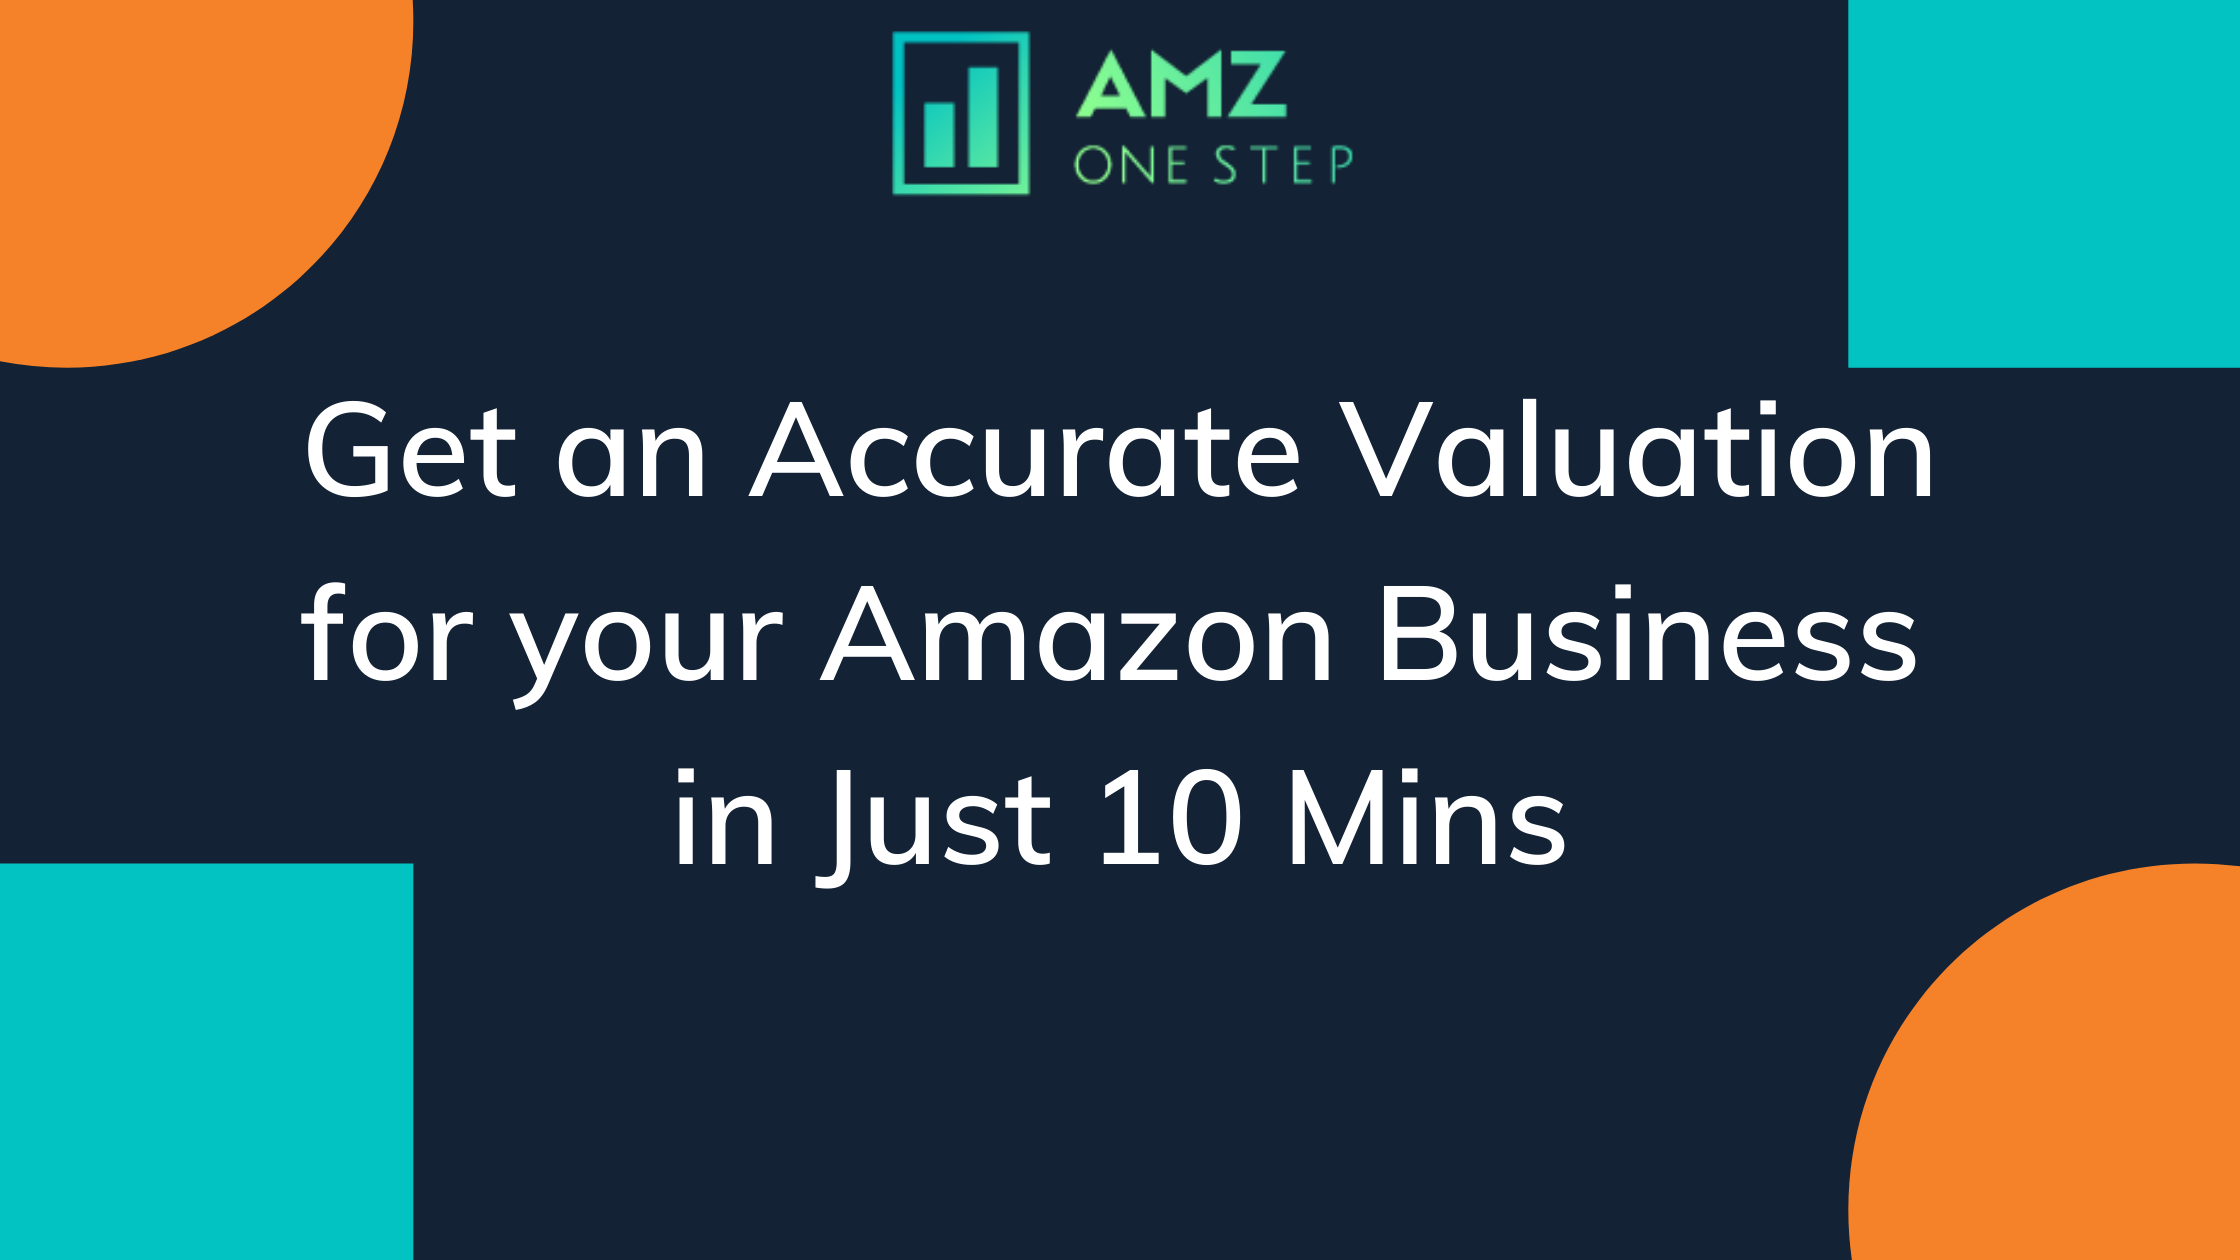 Get an Accurate Valuation for your Amazon Business in Just 10 Mins